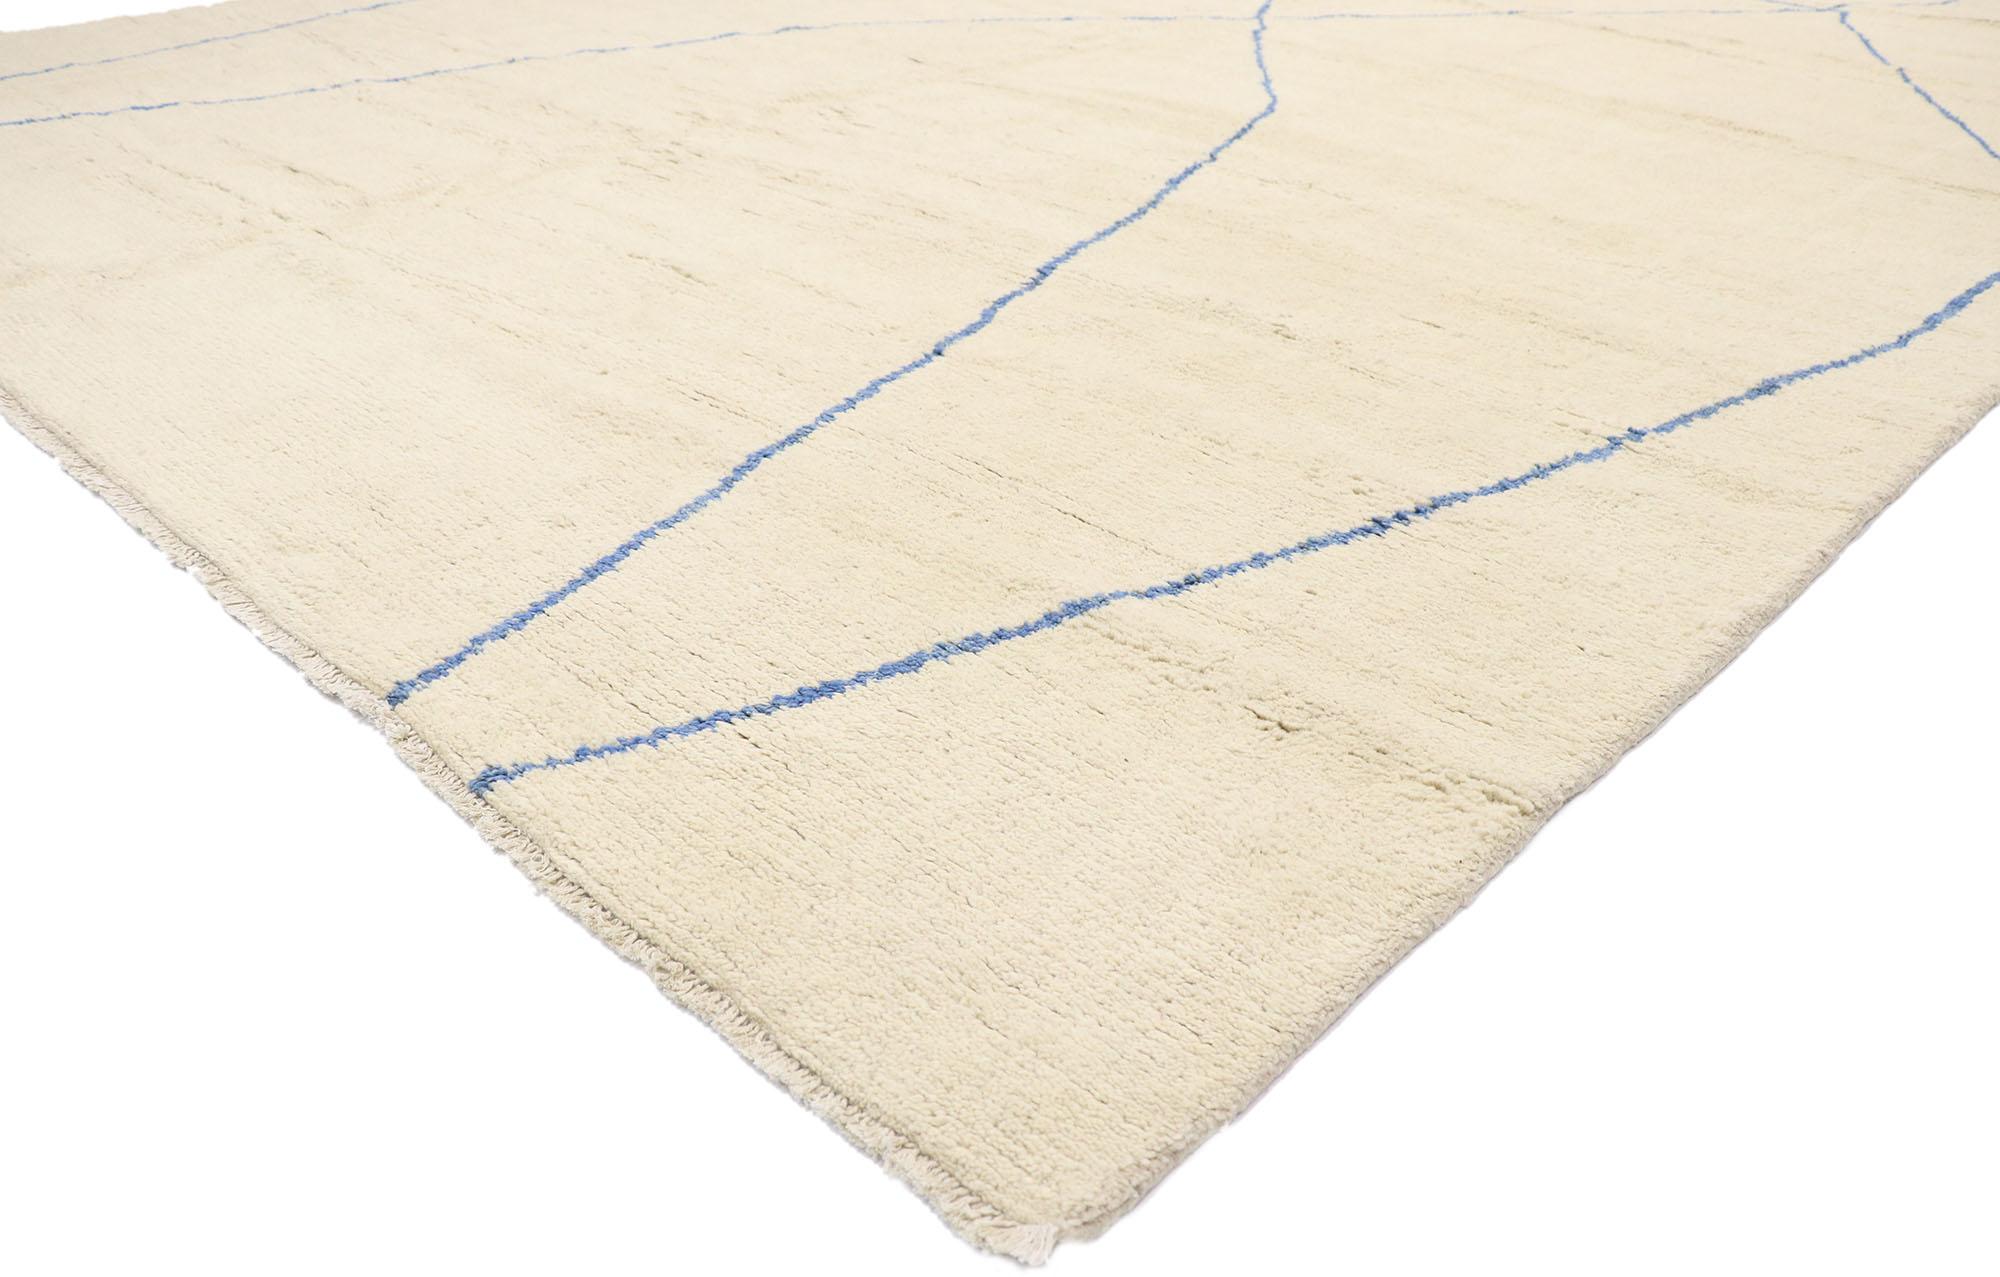 80544 Large Organic Modern Moroccan Rug, 12'03 x 15'09.
Wabi-Sabi meets Boho Hygge in this large Moroccan rug. The whimsical design and dreamy color palette woven into this piece work together to create a warm, effortless atmosphere. Asymmetrical